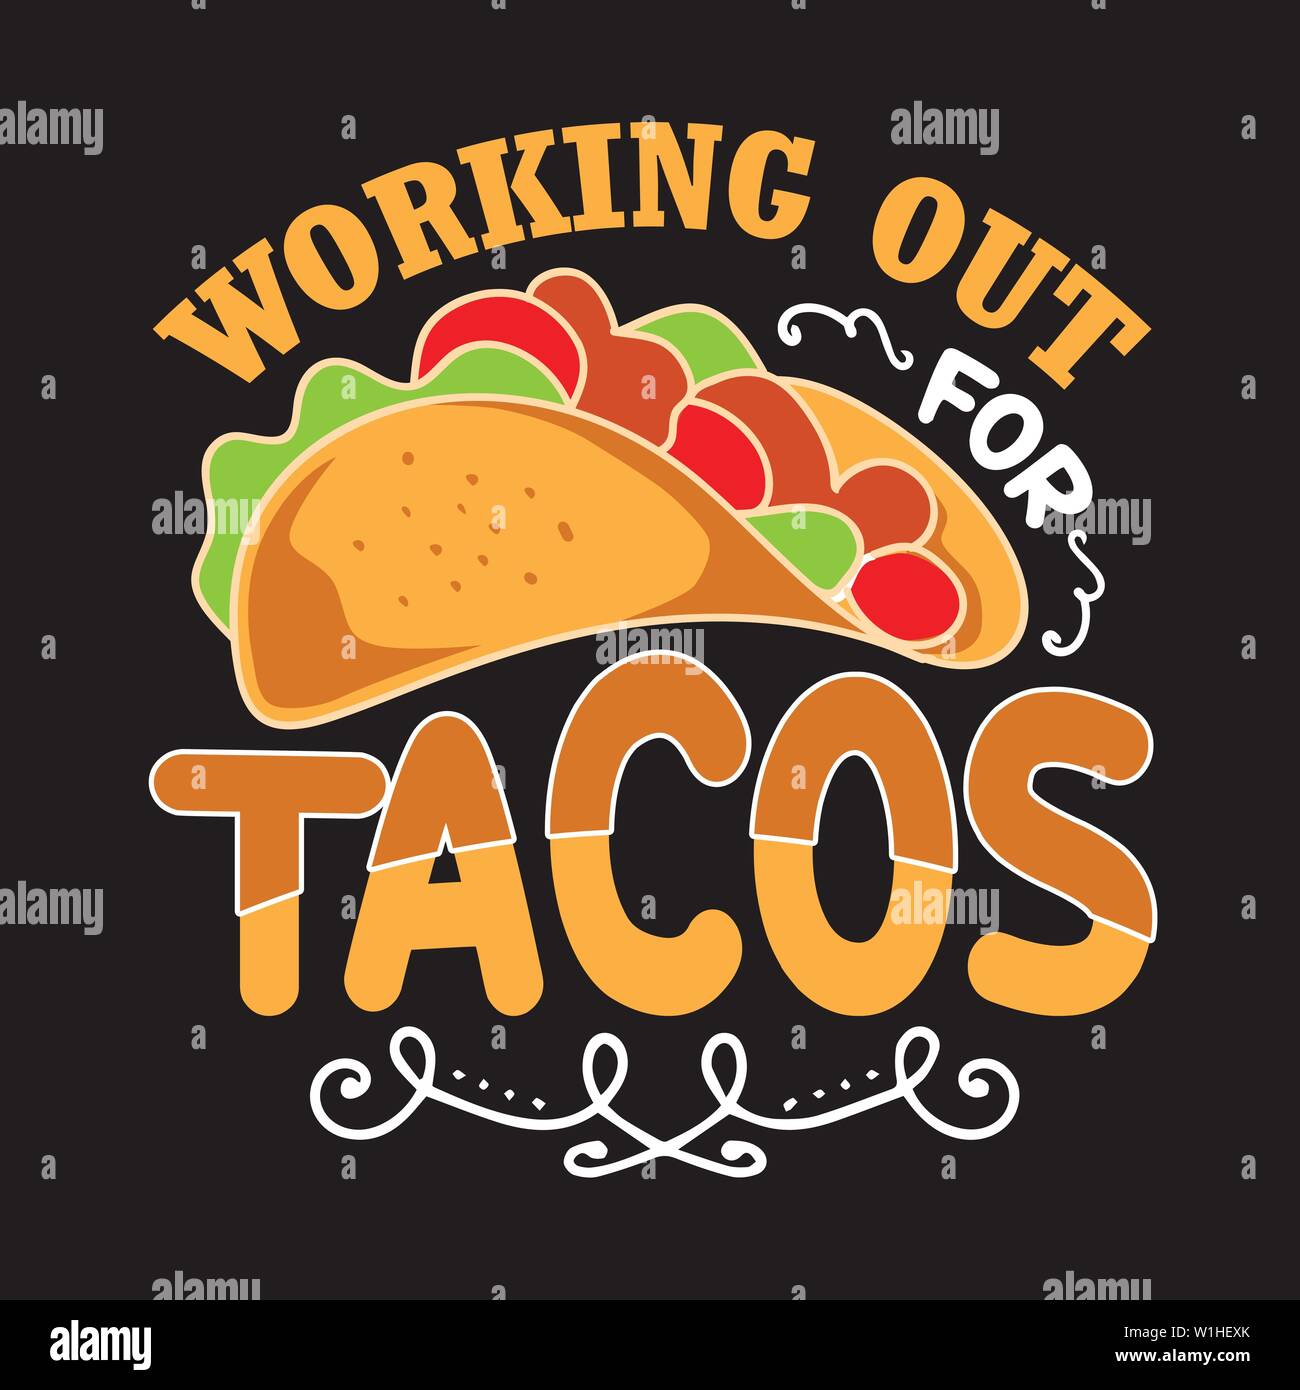 Taco Quote and Saying. Working out tacos Stock Vector